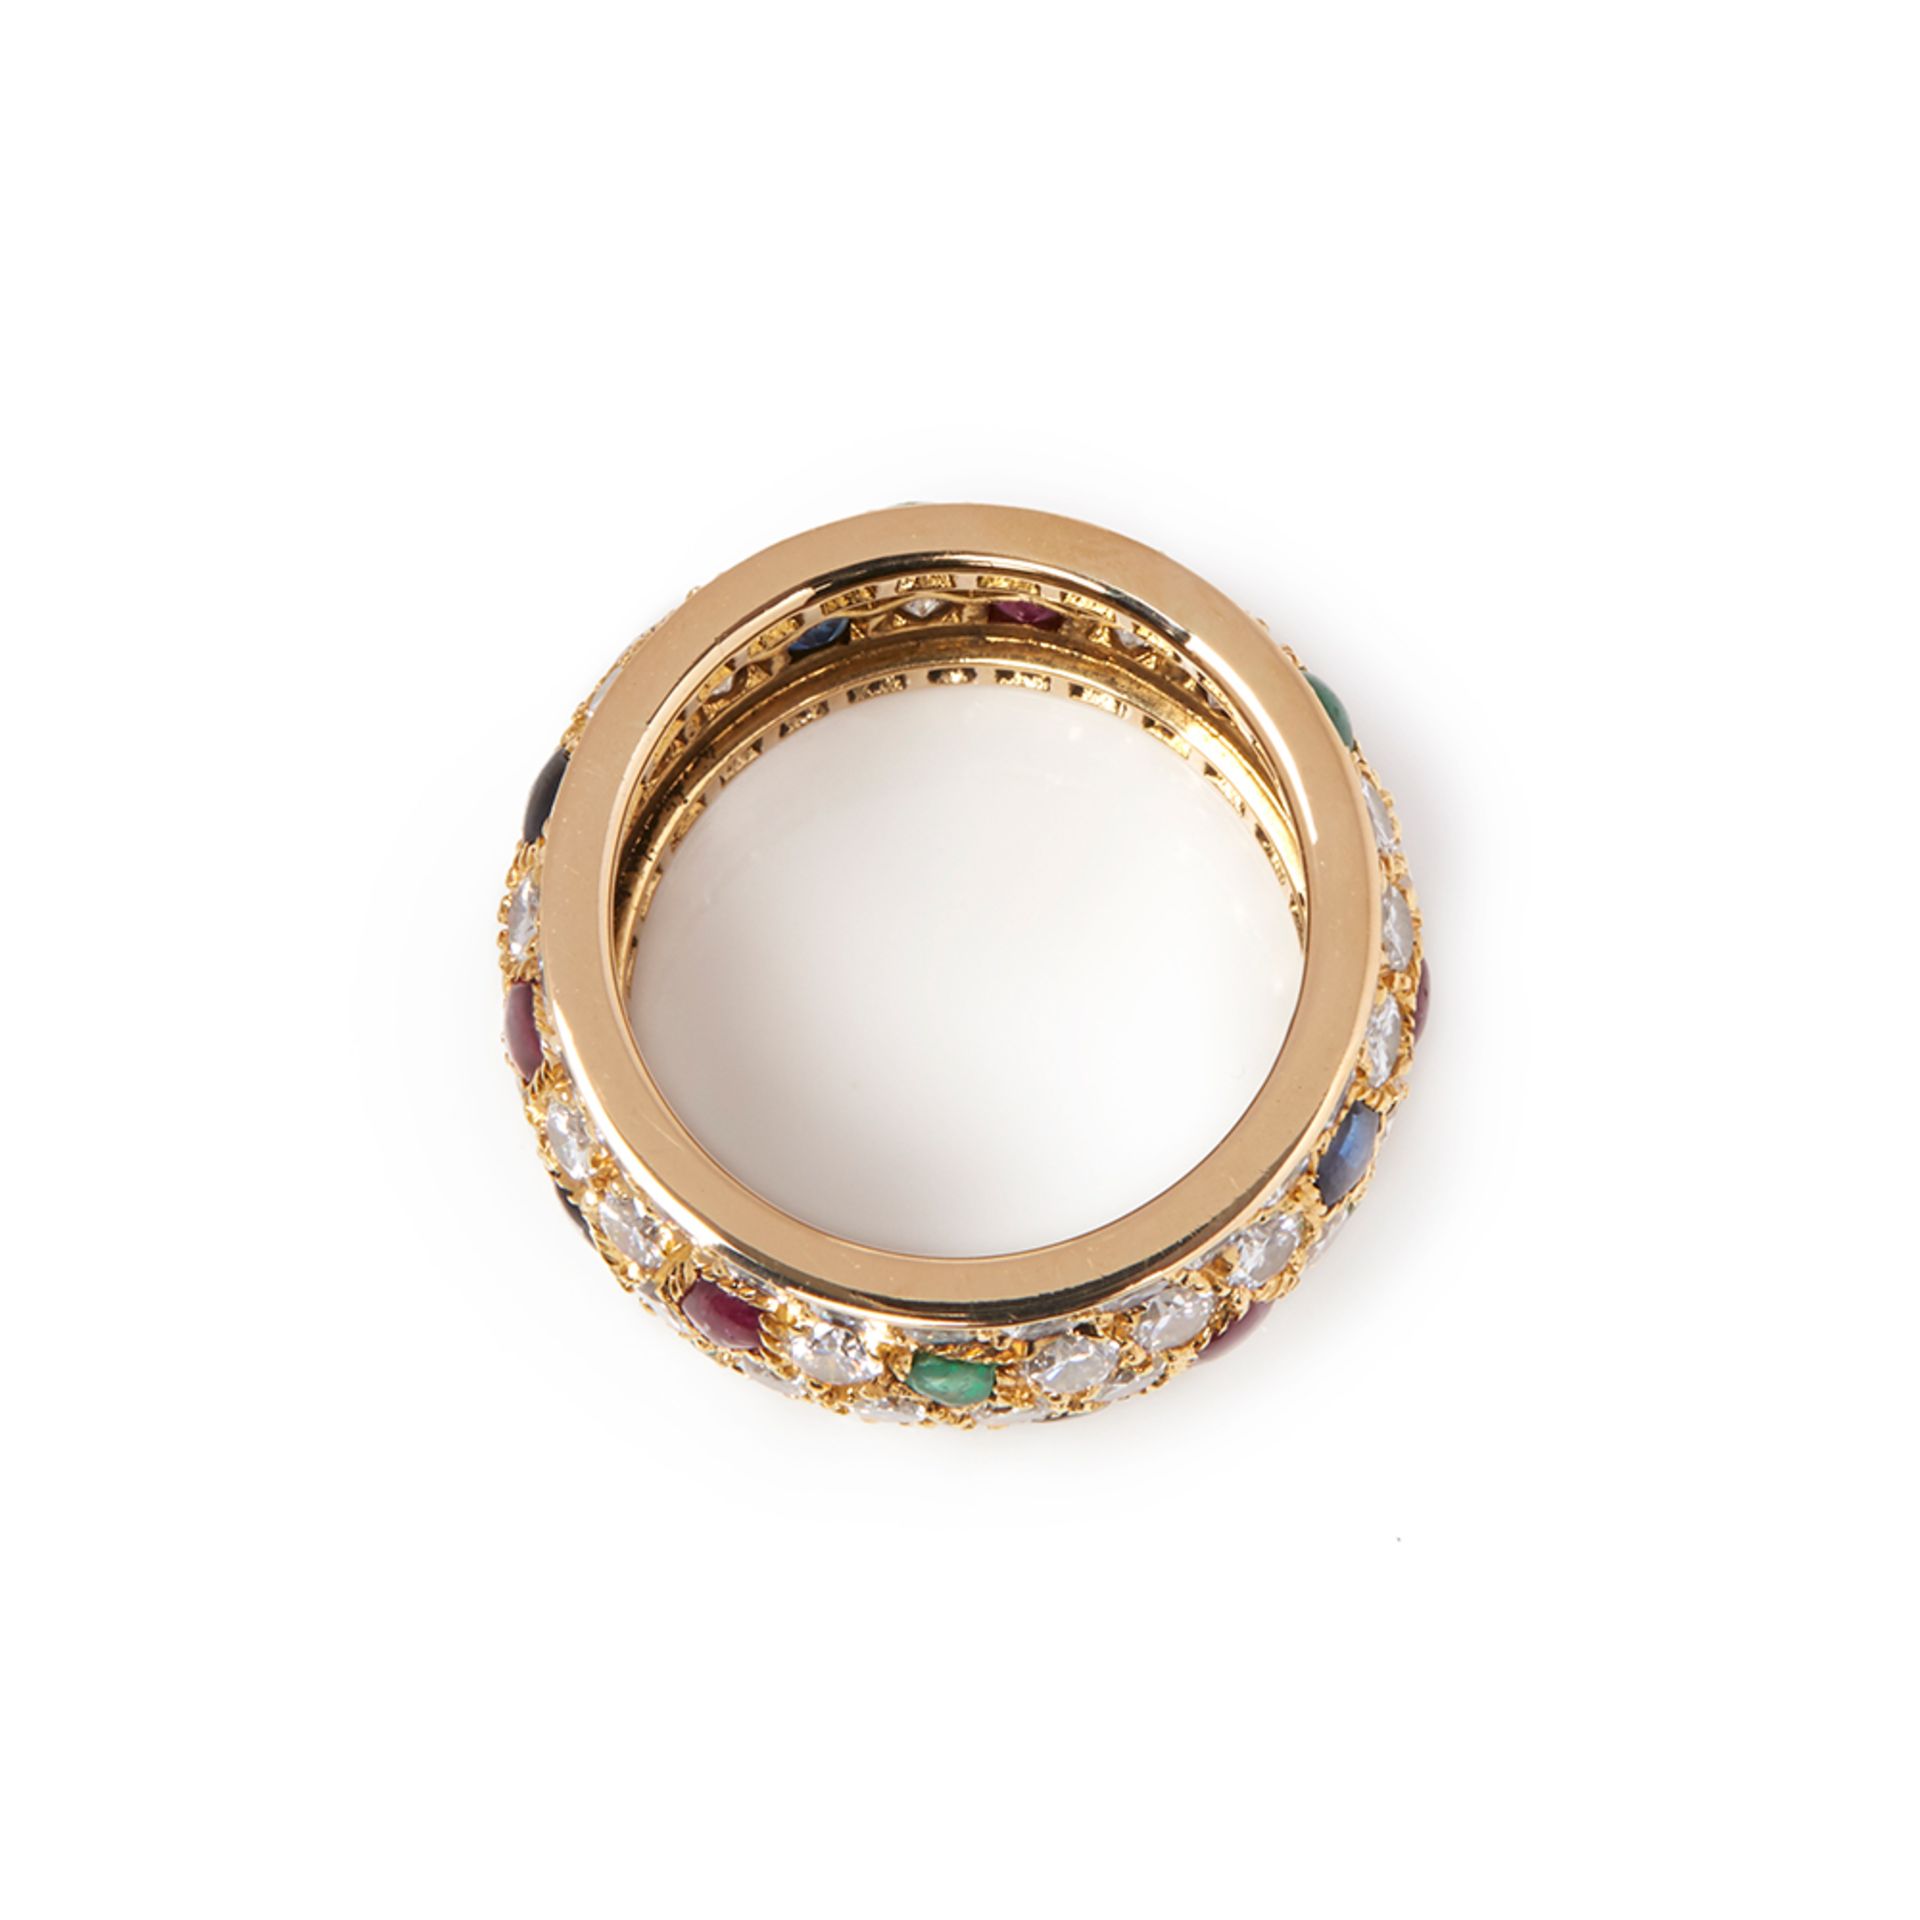 Cartier 18k Yellow Gold Nigeria Ring - Image 5 of 7